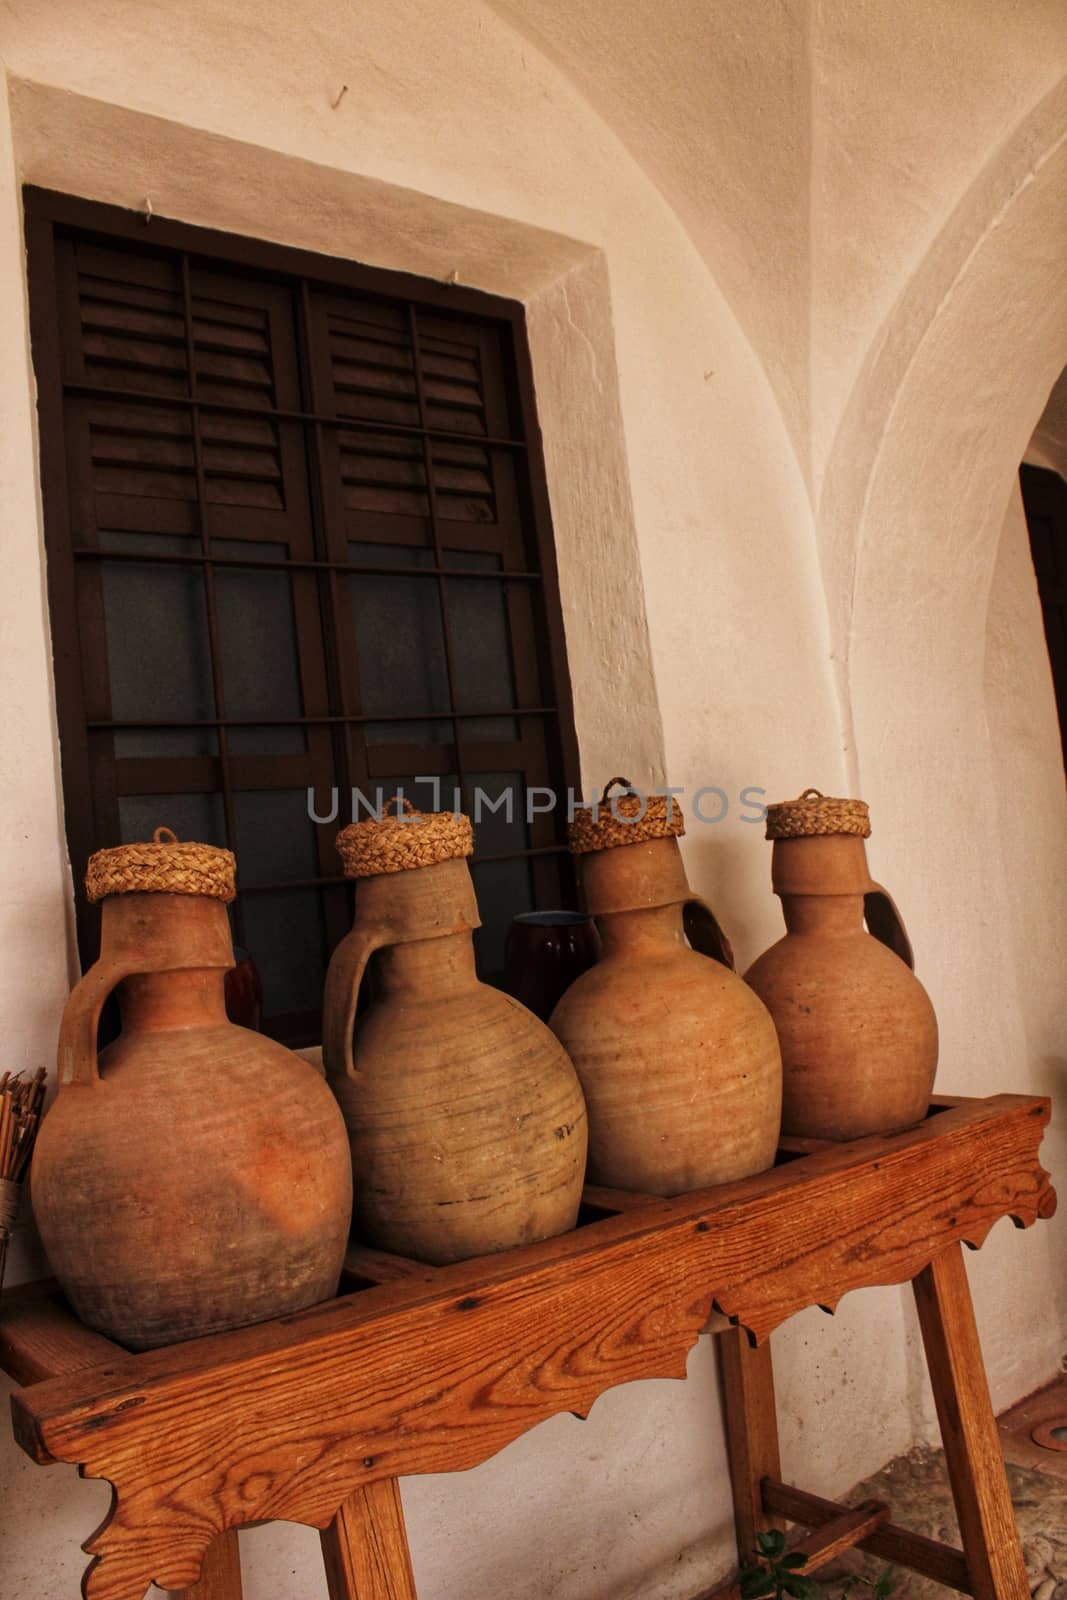 Clay pots for water in a typical courtyard of a Spanish house by soniabonet